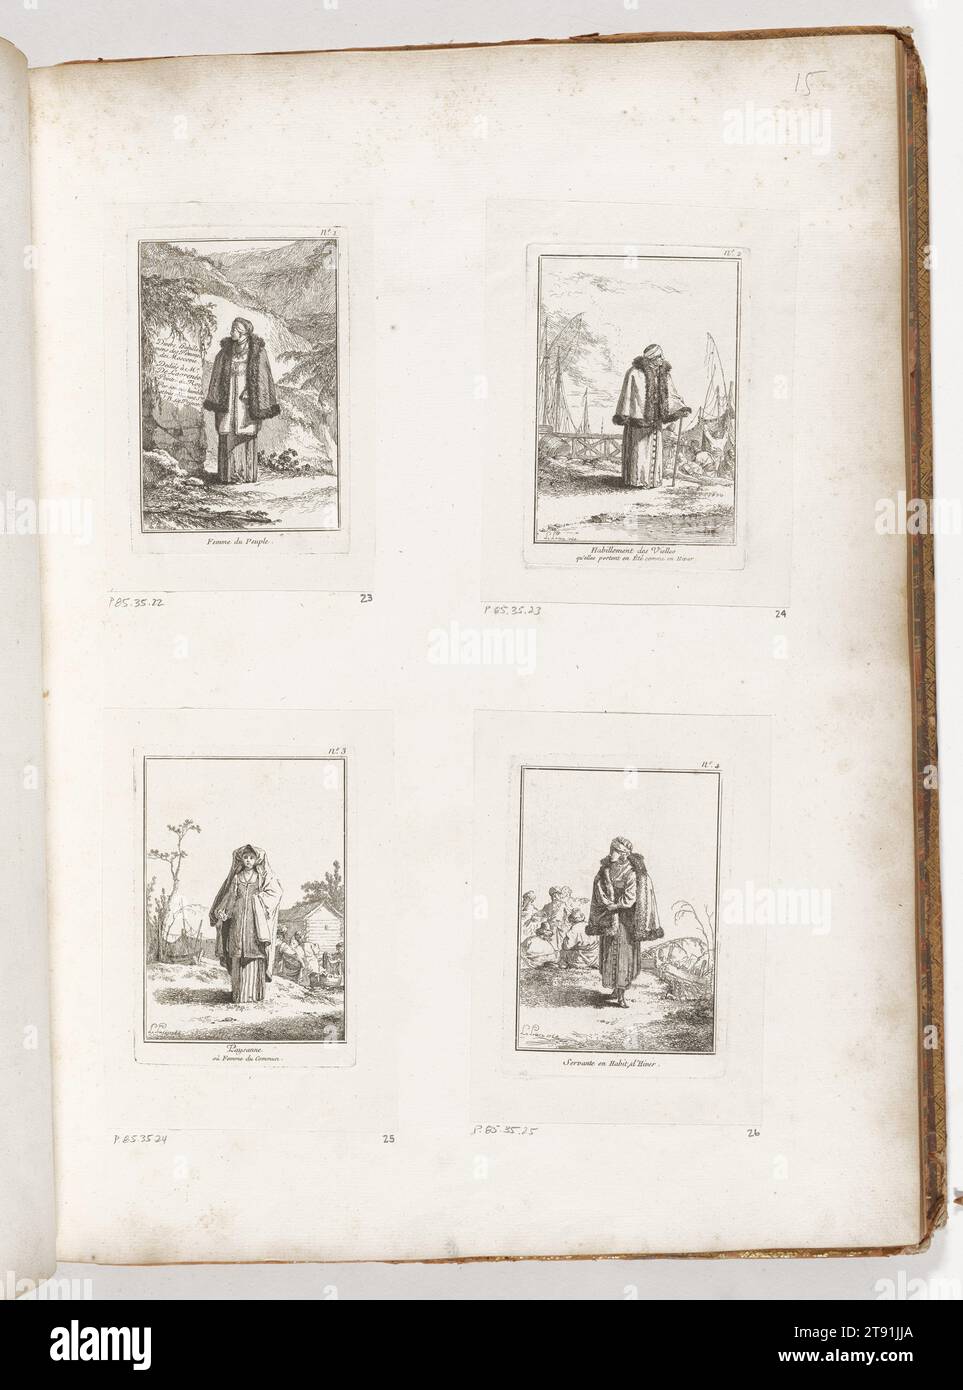 Servant in Winter Clothing, 1764, Jean-Baptiste Le Prince, French, 1734 - 1781, 5 x 3 1/2 in. (12.7 x 8.89 cm) (image)5 3/8 x 3 15/16 in. (13.65 x 10 cm) (plate)7 1/8 x 5 1/8 in. (18.1 x 13.02 cm) (sheet), Etching, France, 18th century Stock Photo